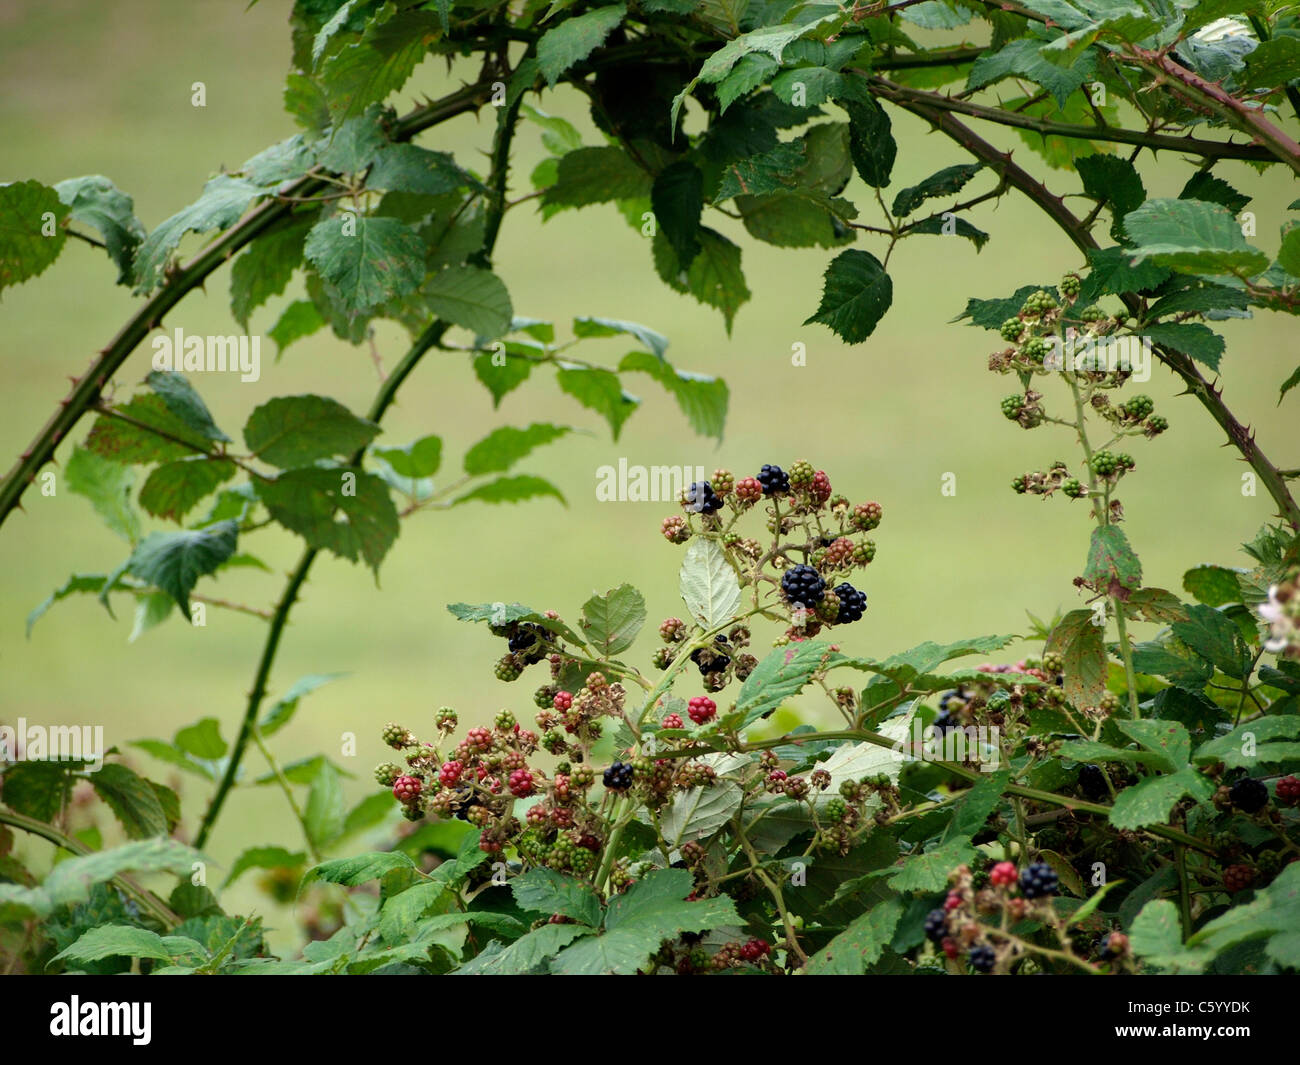 wild blackberries with ripe and unripe fruits showing, and the many thorns visible. St. Hilaire, France Stock Photo